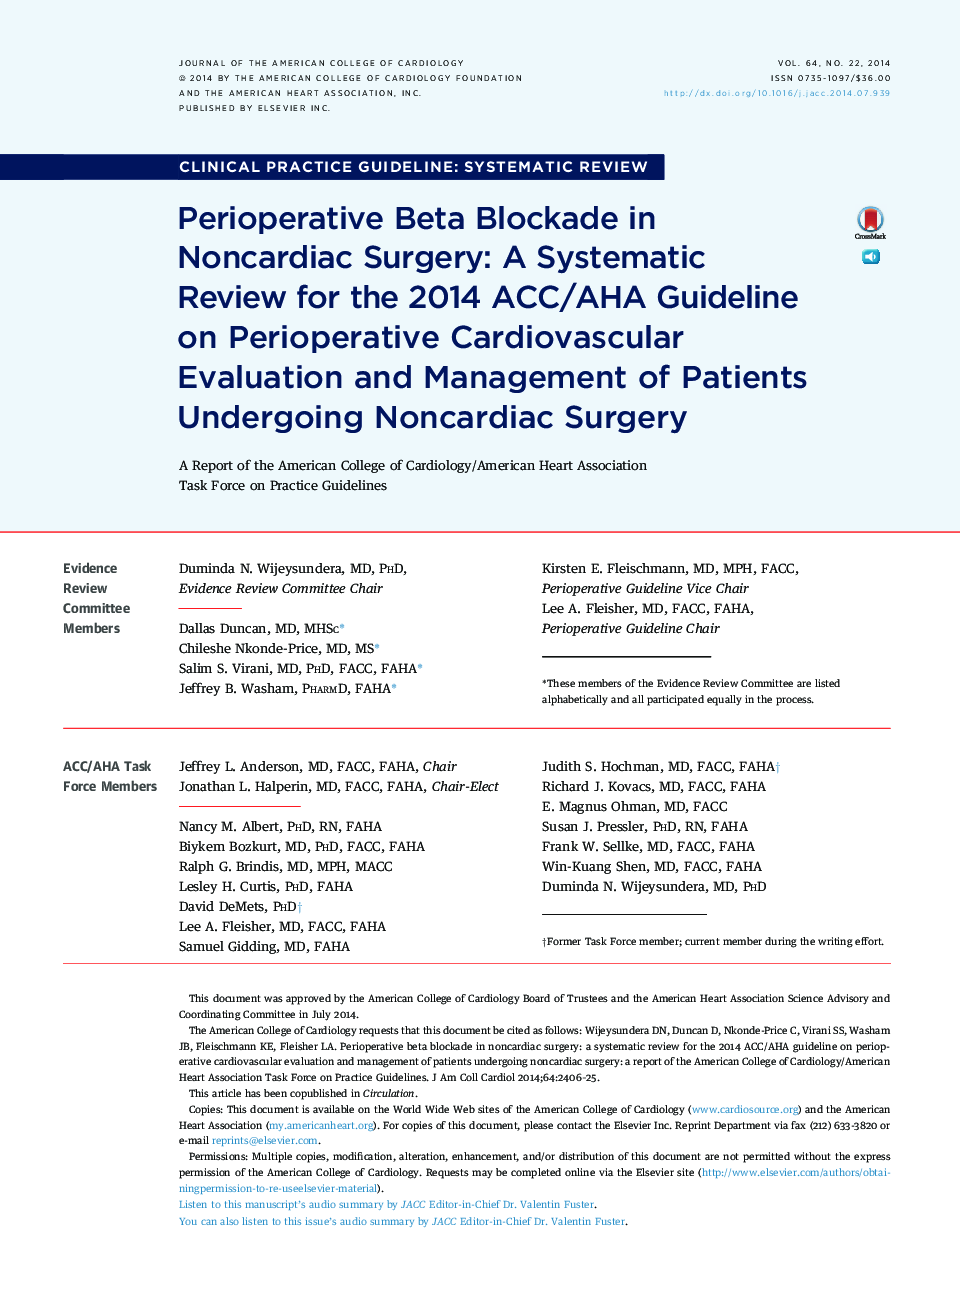 Perioperative Beta Blockade in Noncardiac Surgery: A Systematic Review for the 2014 ACC/AHA Guideline on Perioperative Cardiovascular Evaluation and Management of Patients UndergoingÂ Noncardiac Surgery: A Report of the American College of Cardiology/Amer